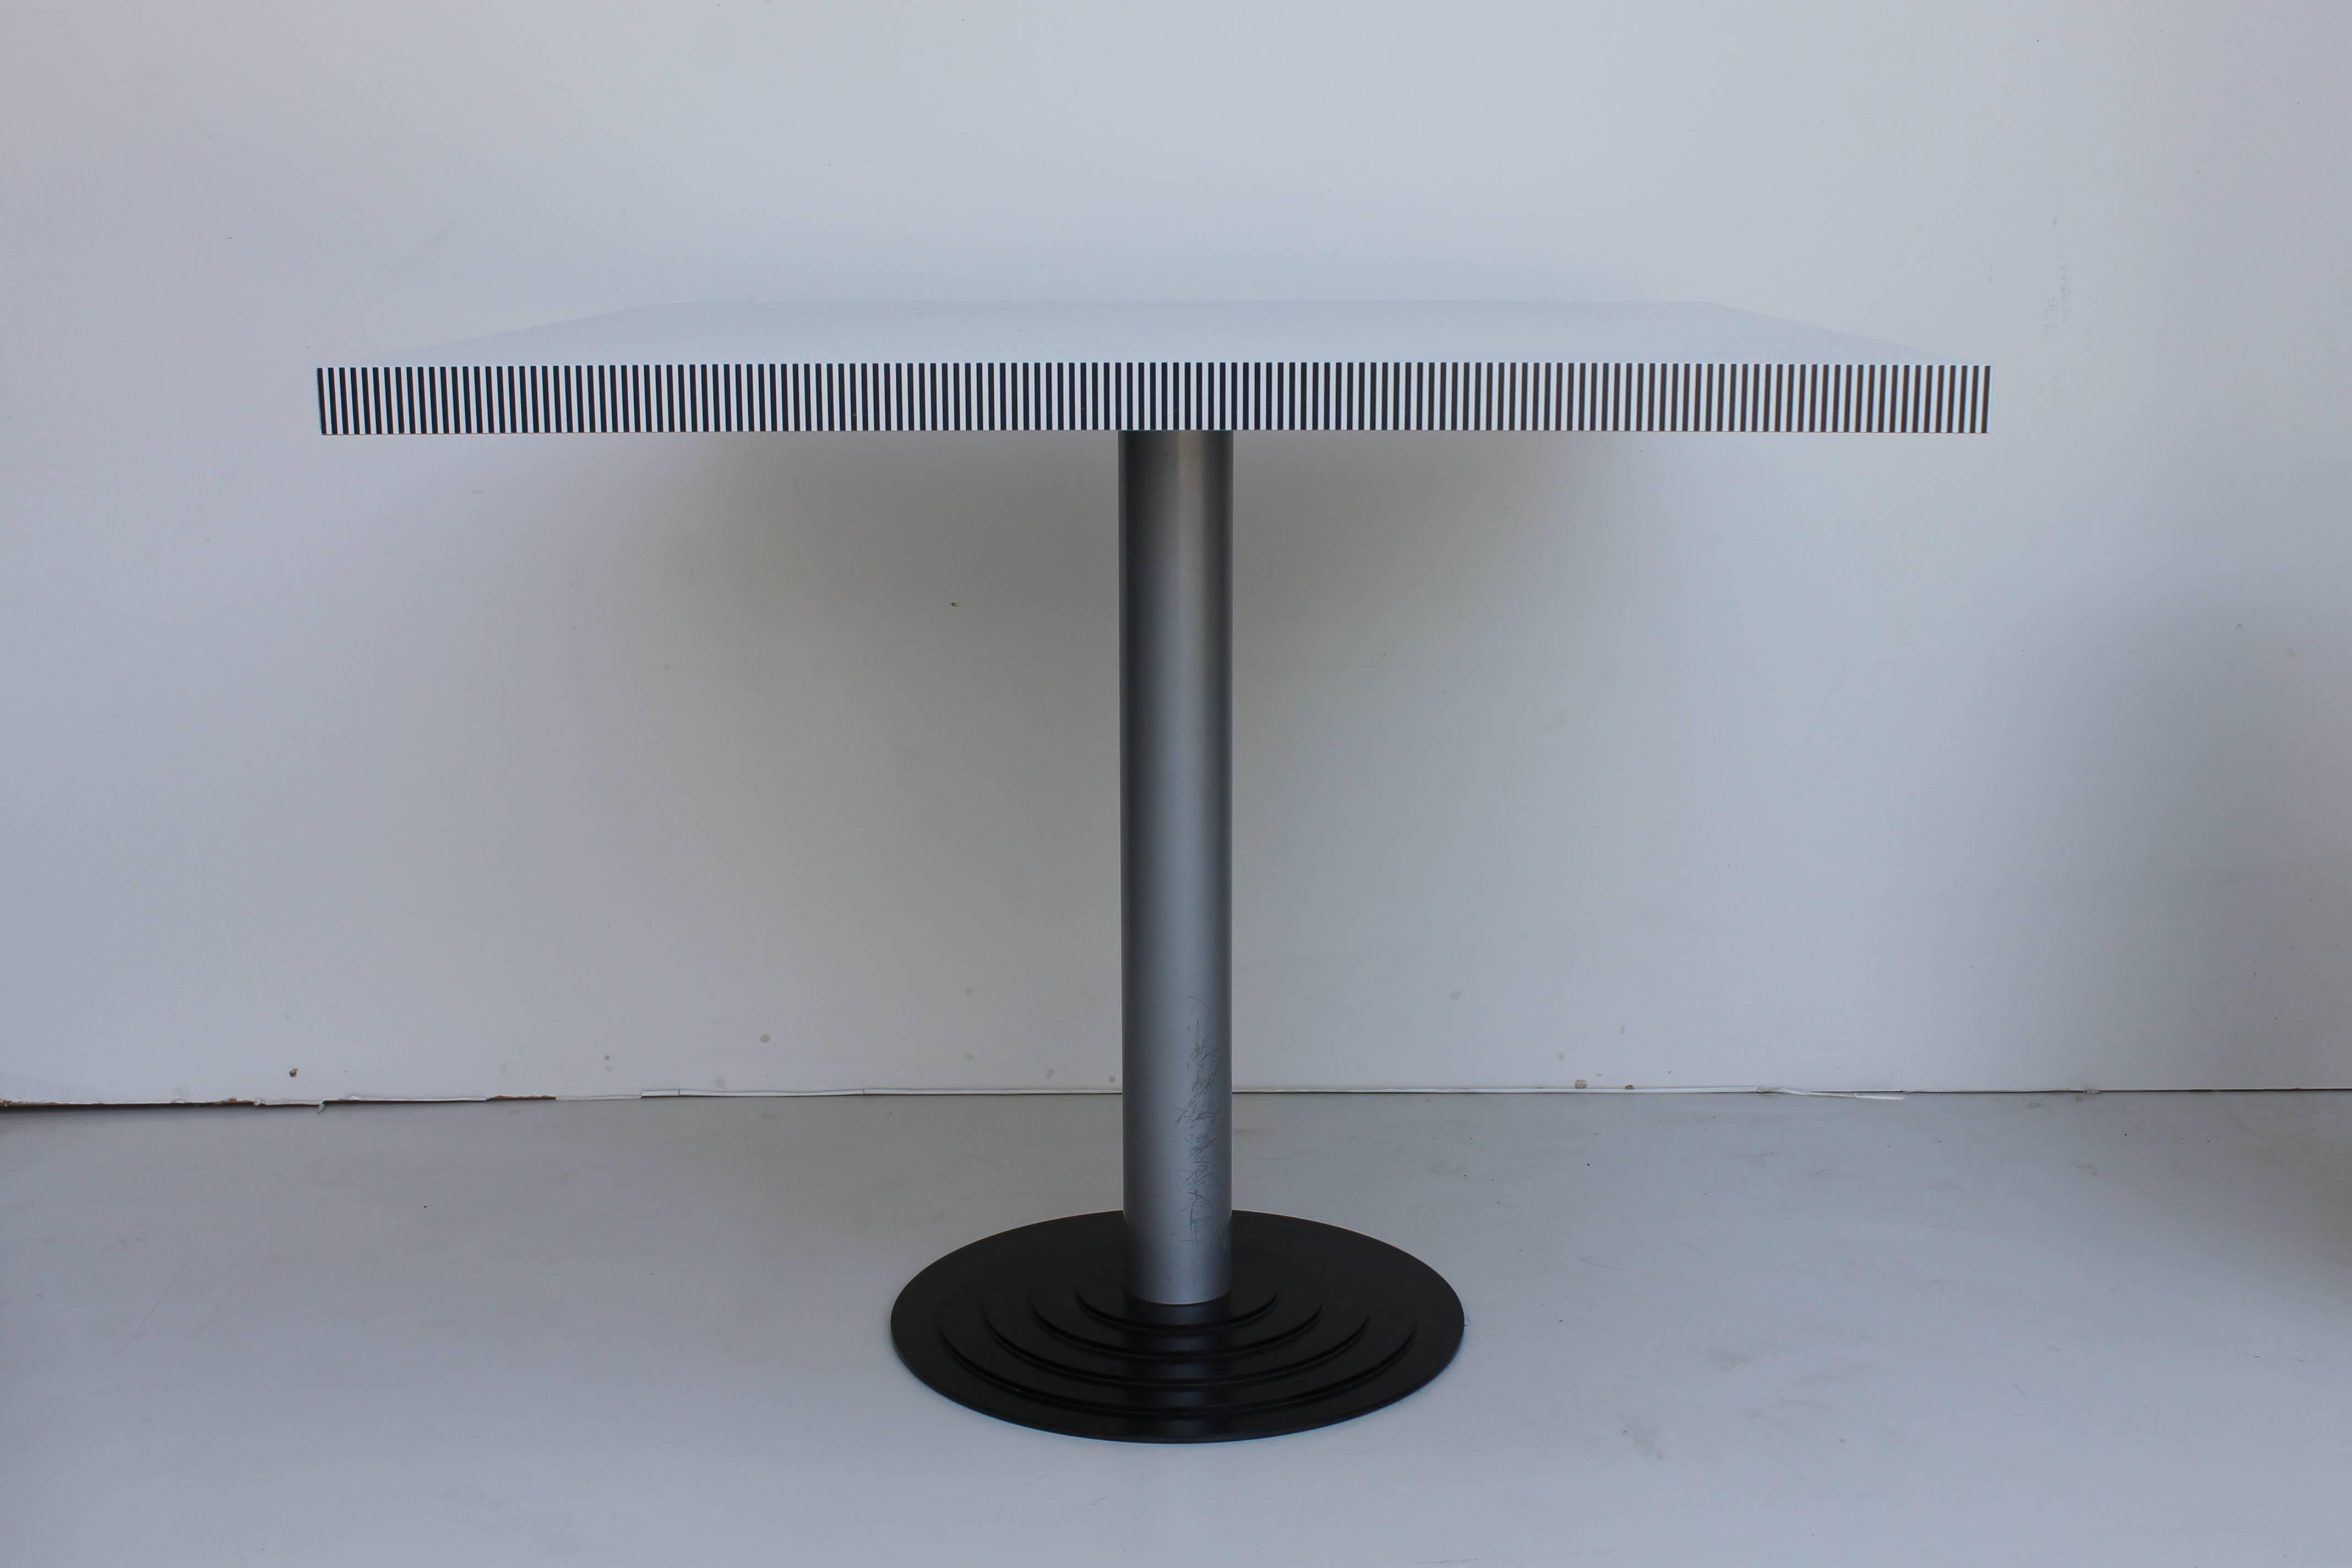 A striking and rare dining table produced by Driade, the company which Astori co-founded in 1968. The table has a formica top which sits on top of a grey pedestal on a black base. A fantastic example of early Italian Postmodernism with obvious